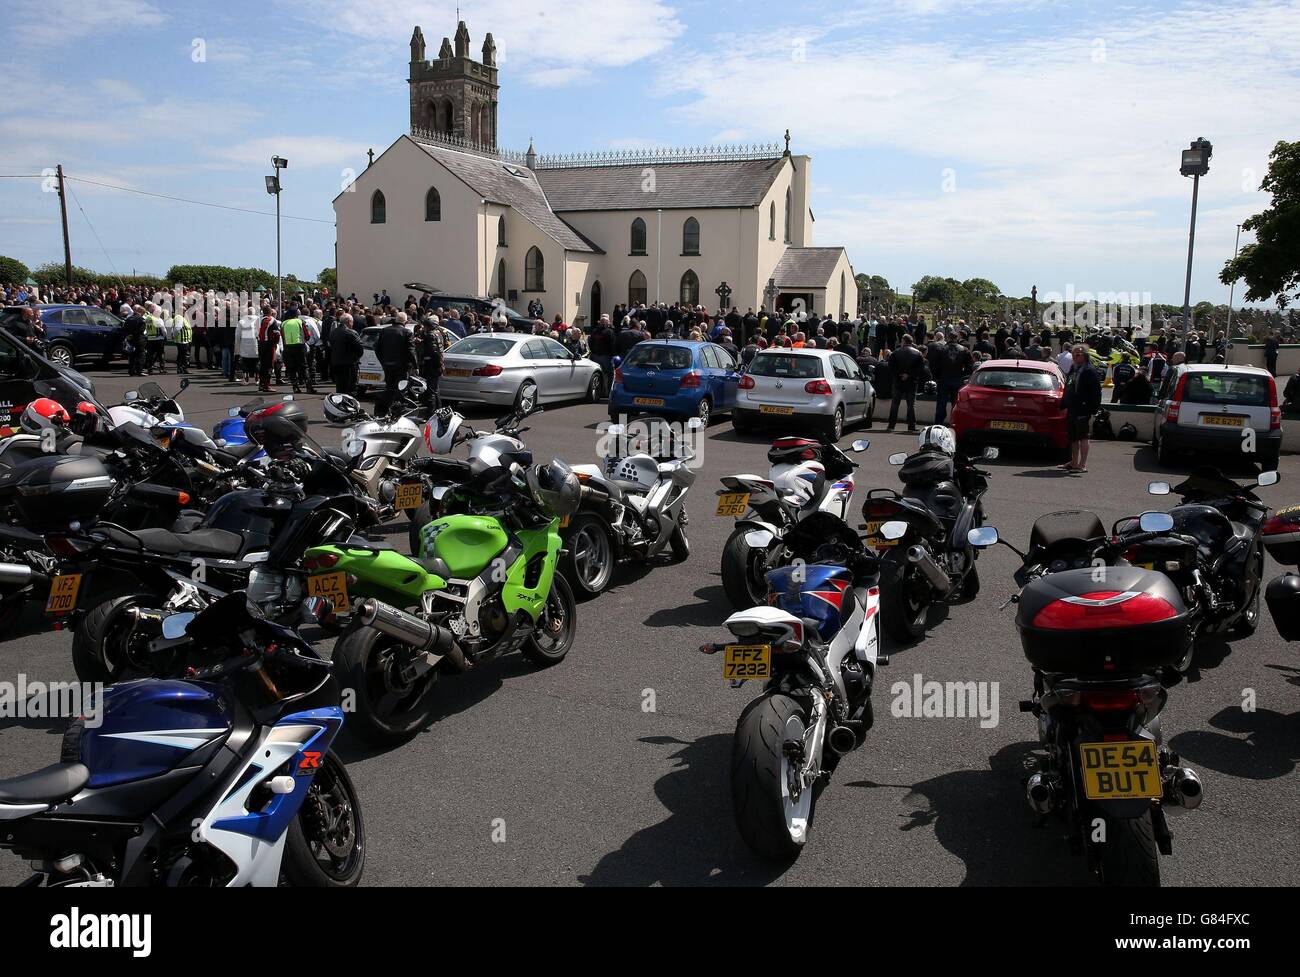 Motorcycles parked outside St Patrick's Church in Portaferry, Co. Down, during the requiem mass of motorbike racing doctor John Hinds. Stock Photo